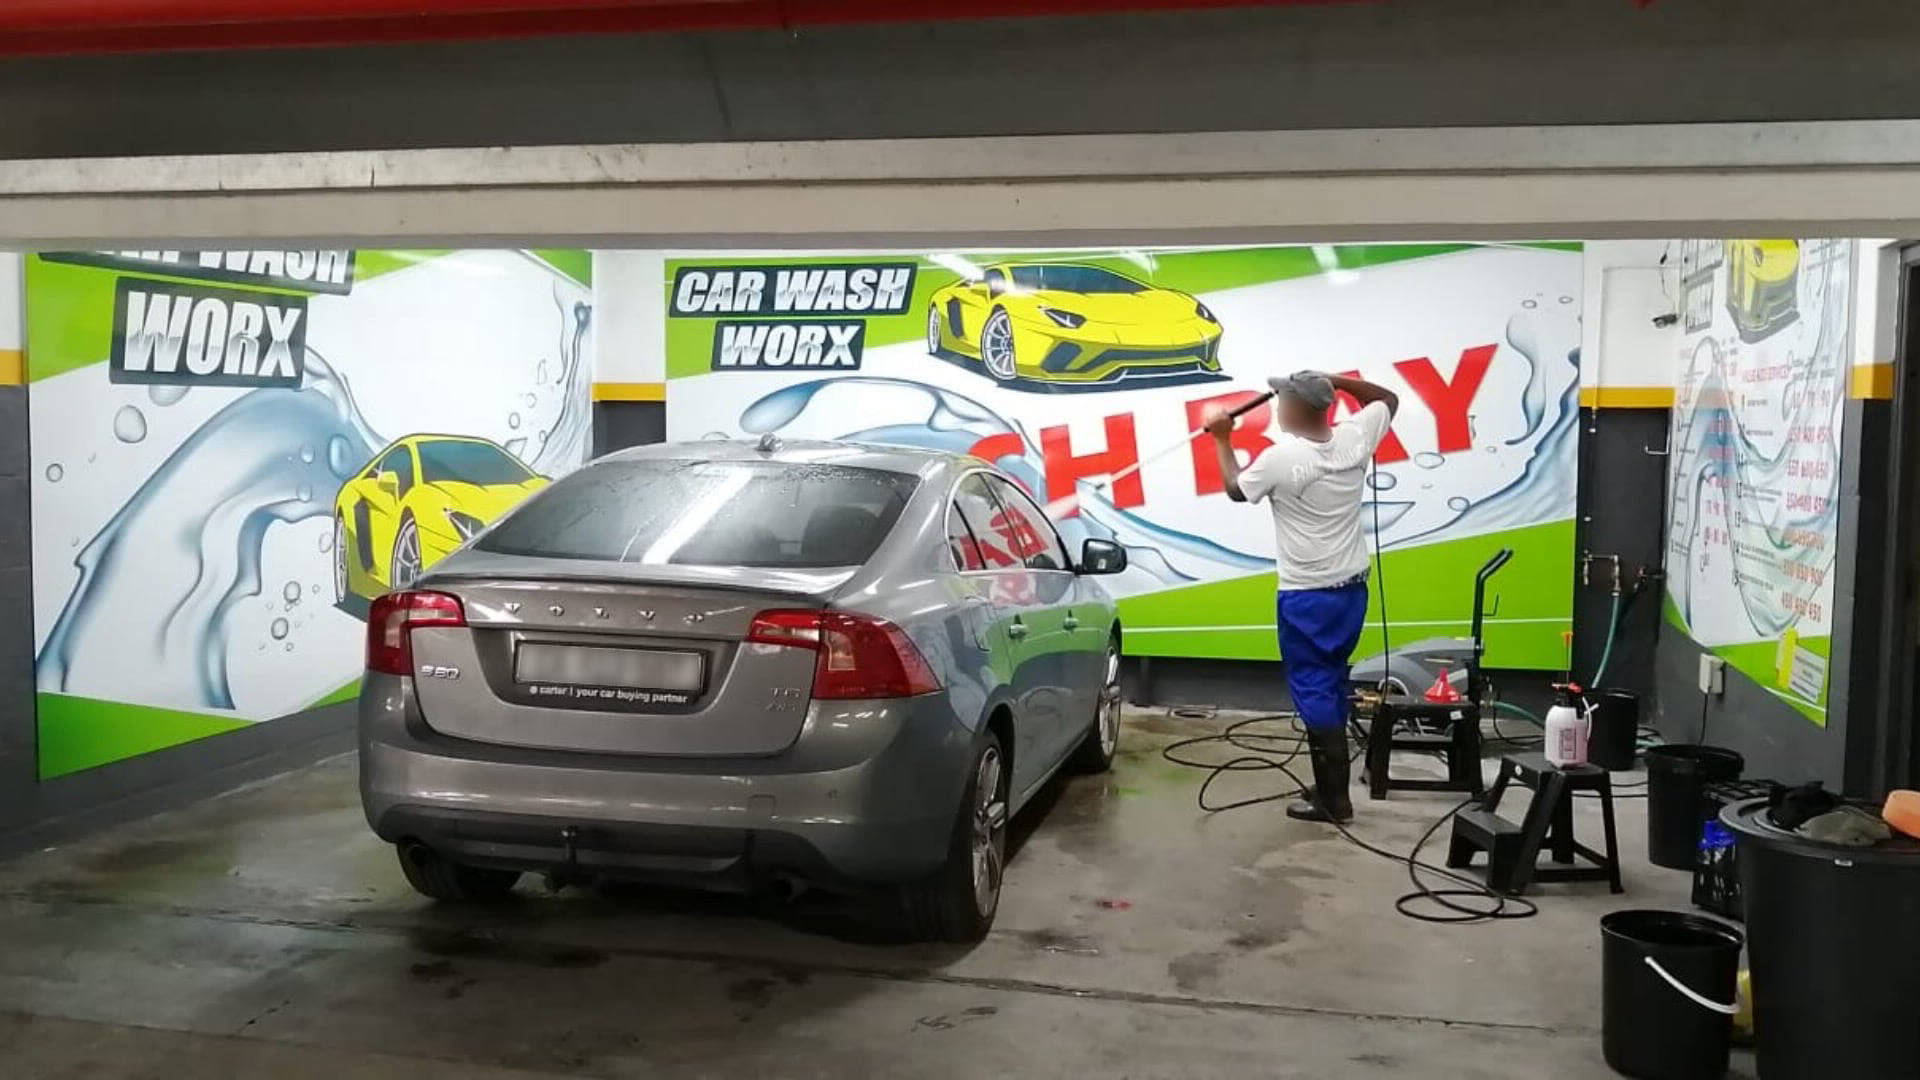 Car Wash Franchises Available, CarWash Worx Head Office, Join The Leading Car Wash Franchising Group, Start Your Own Successful Car Wash Business Now